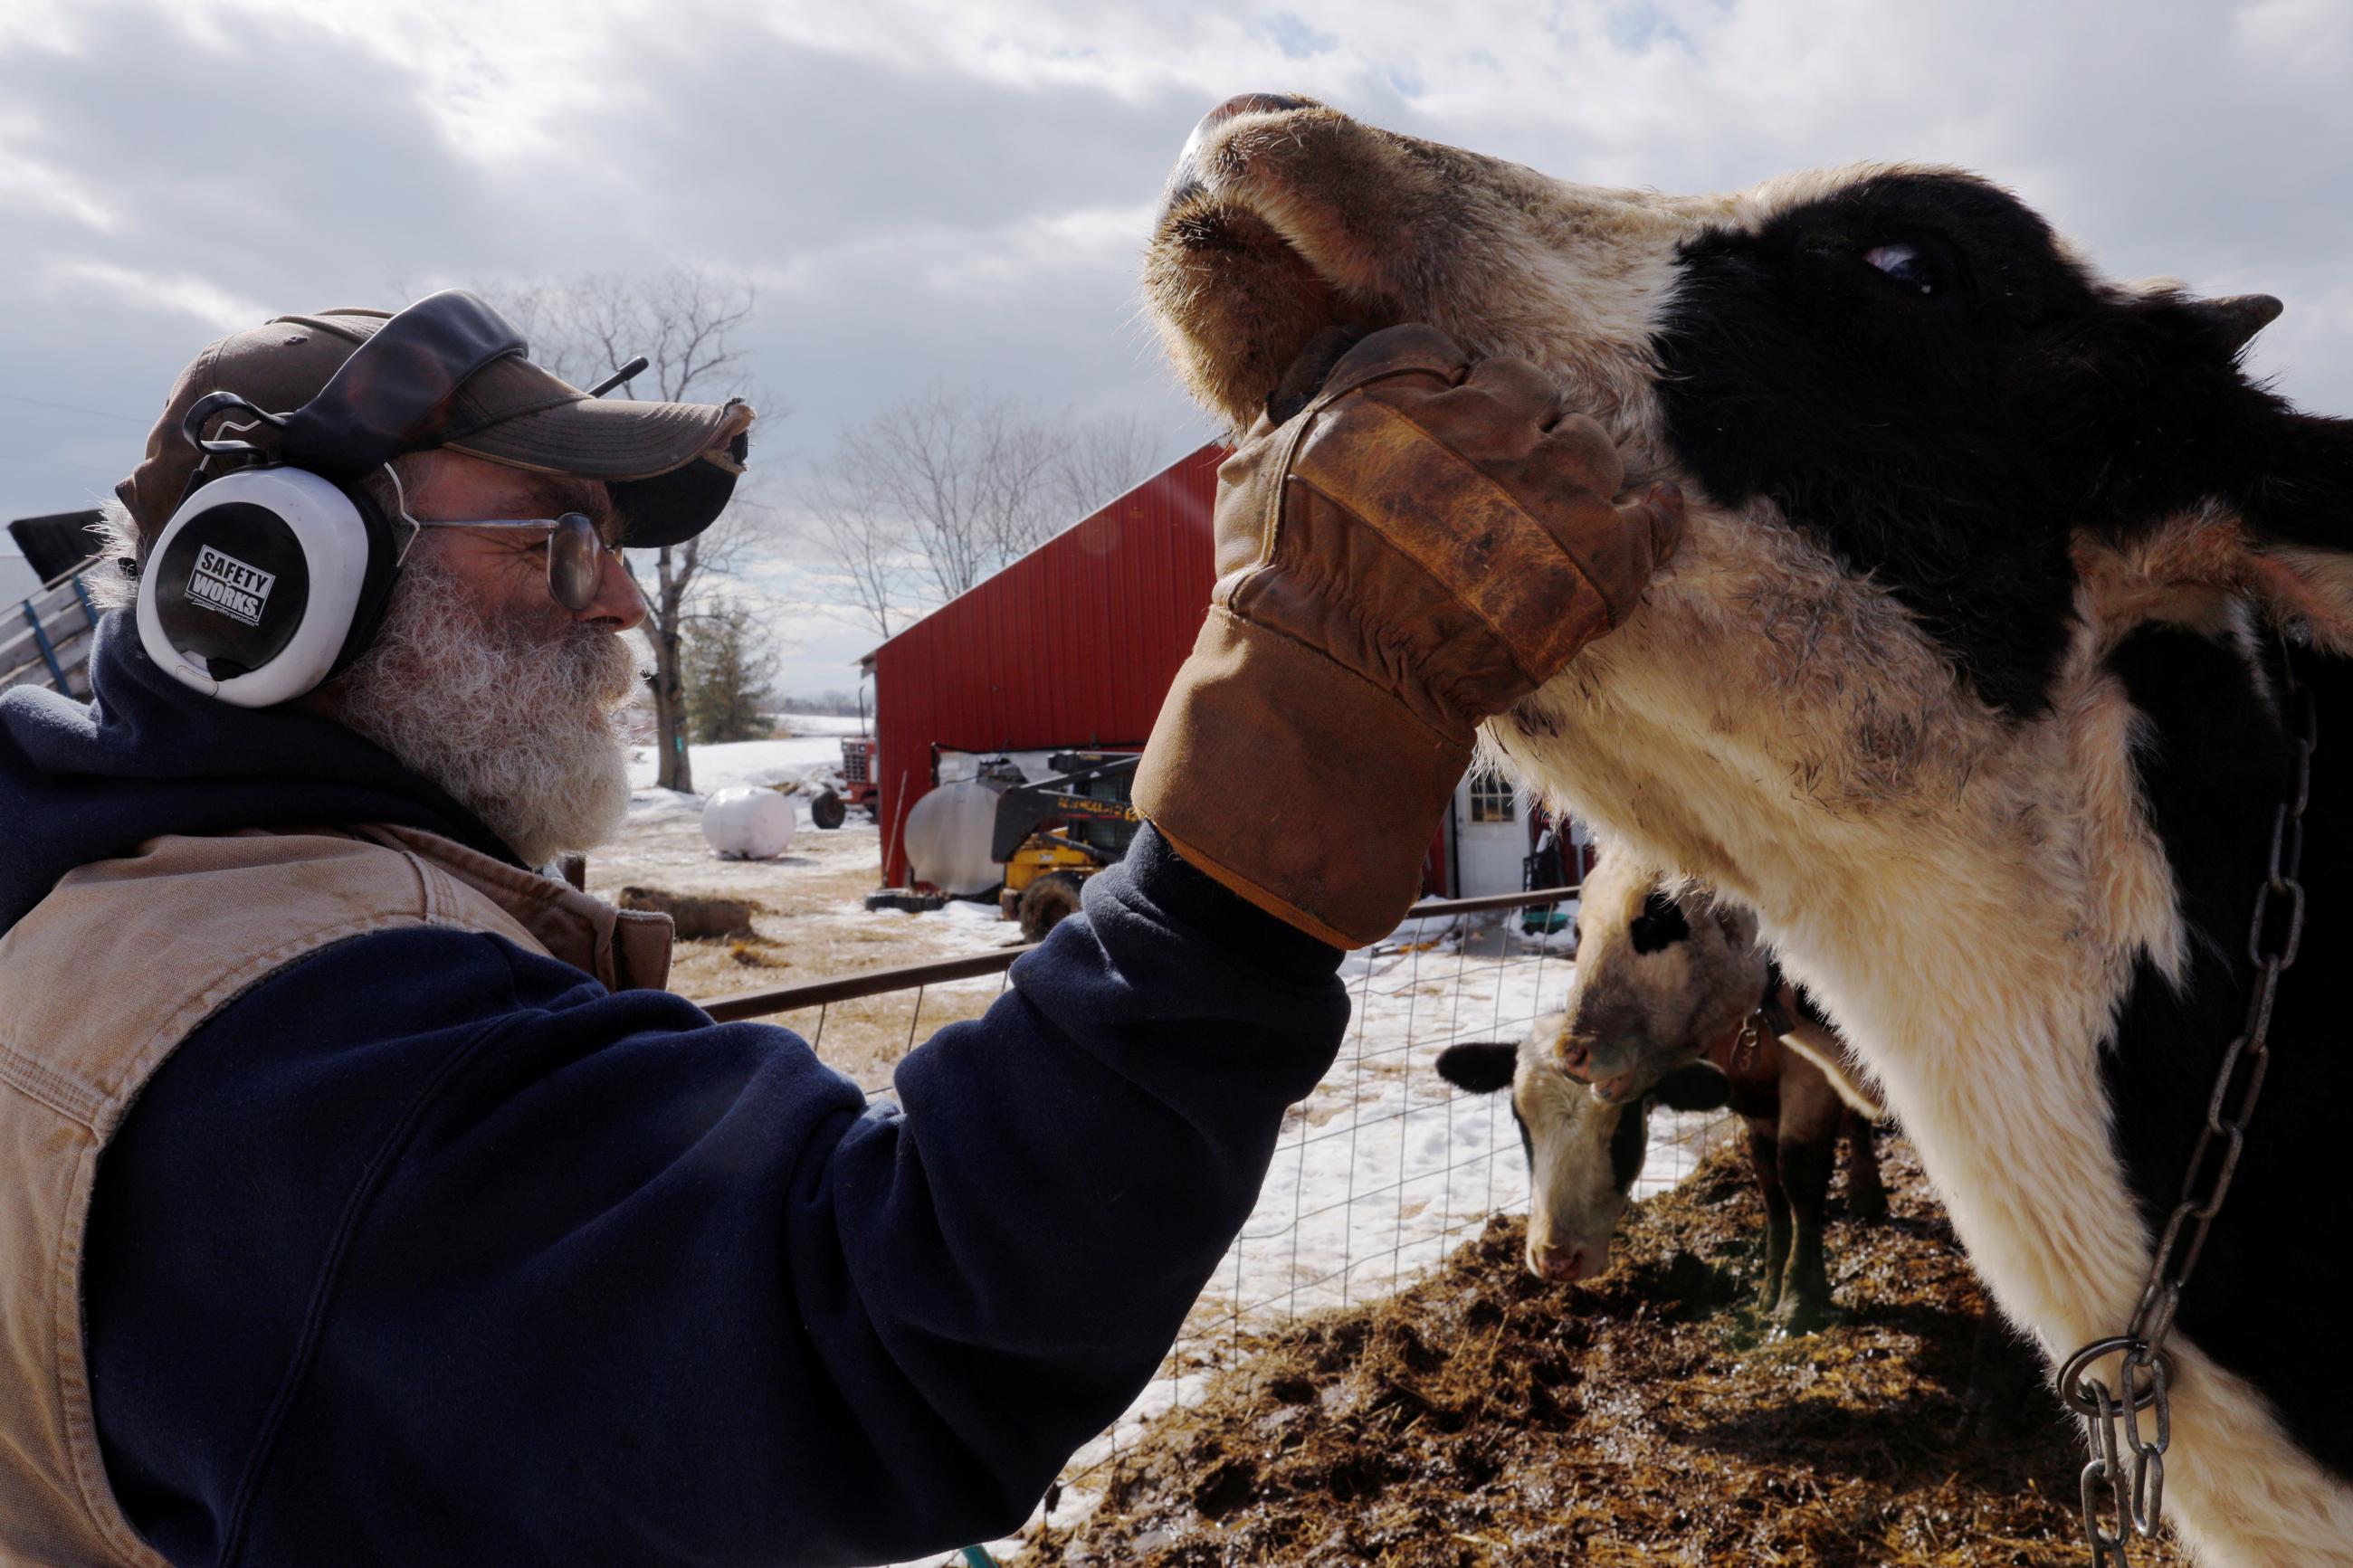 A close-up photograph of dairy farmer Fred Stone checking one of his cows after discovering the soil, hay, and the milk from his cows contain extremely high levels of PFAS, chemicals resulting from a 1980s state program that fertilized his pastures with treated sludge waste. Photo taken at Stoneridge Farm in Arundel, Maine.